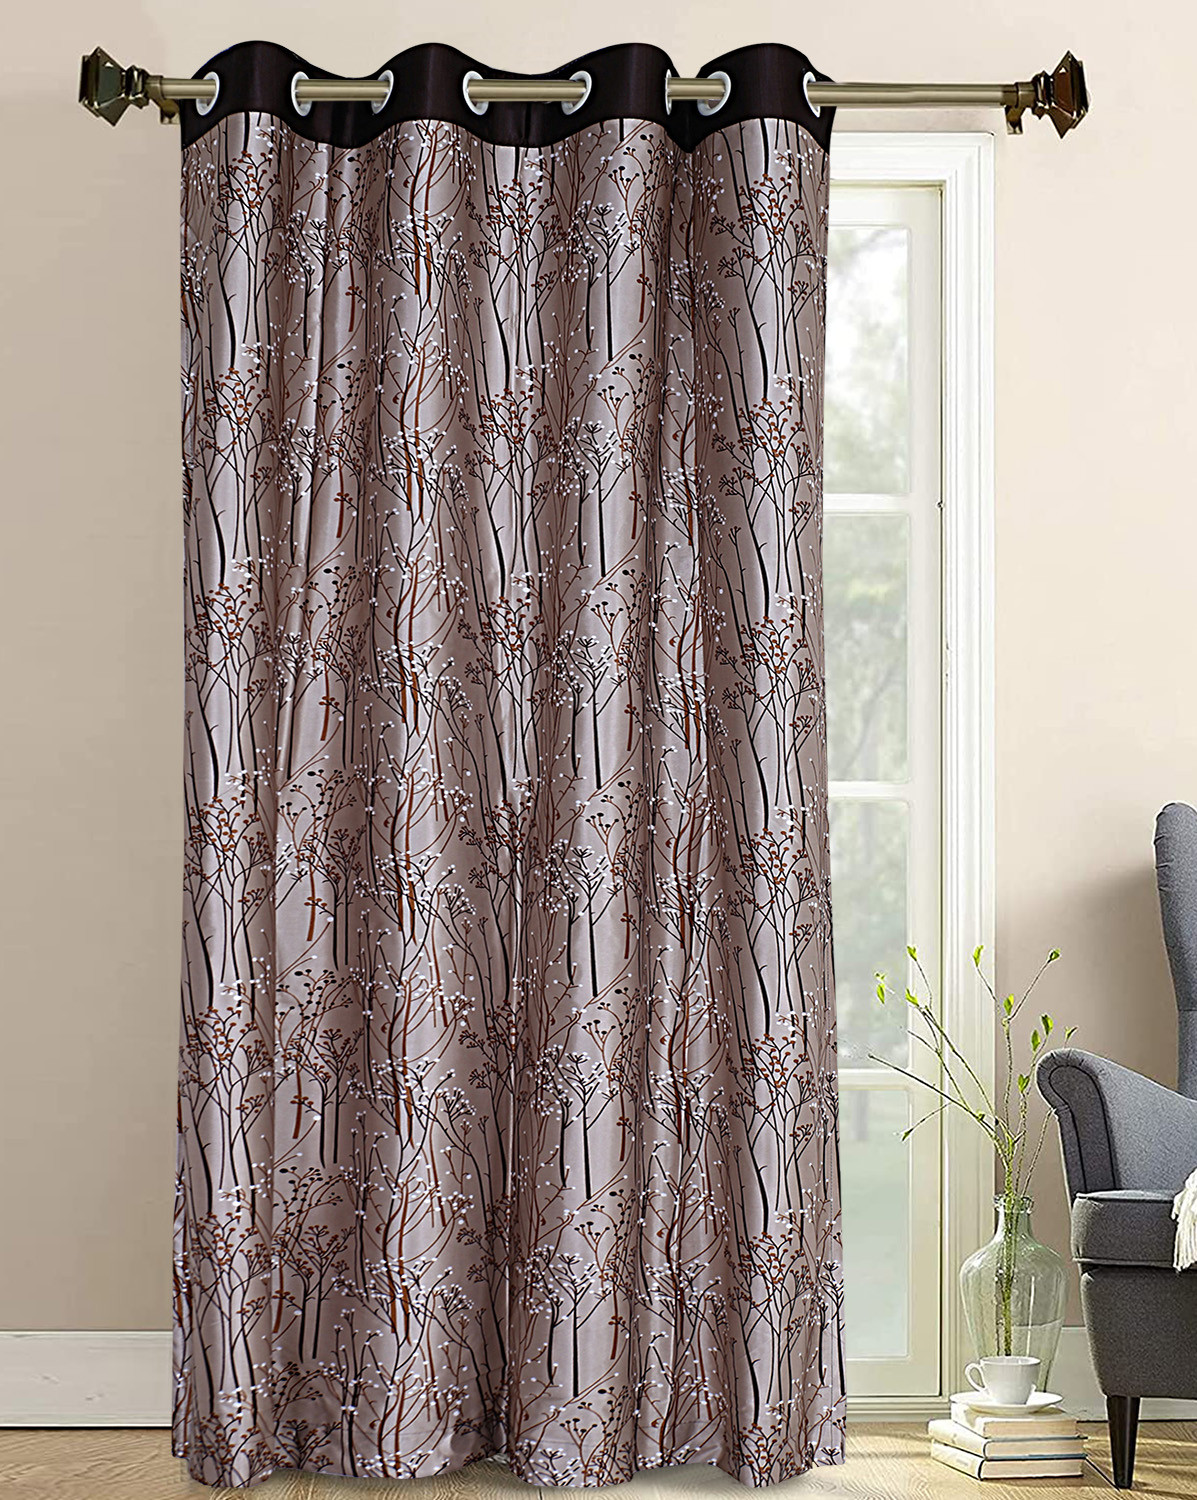 Kuber Industries Polyester Decorative 9 Feet Long Door Curtain|Tree Branches Print Blackout Drapes Curatin With 8 Eyelet For Home & Office (Coffee)